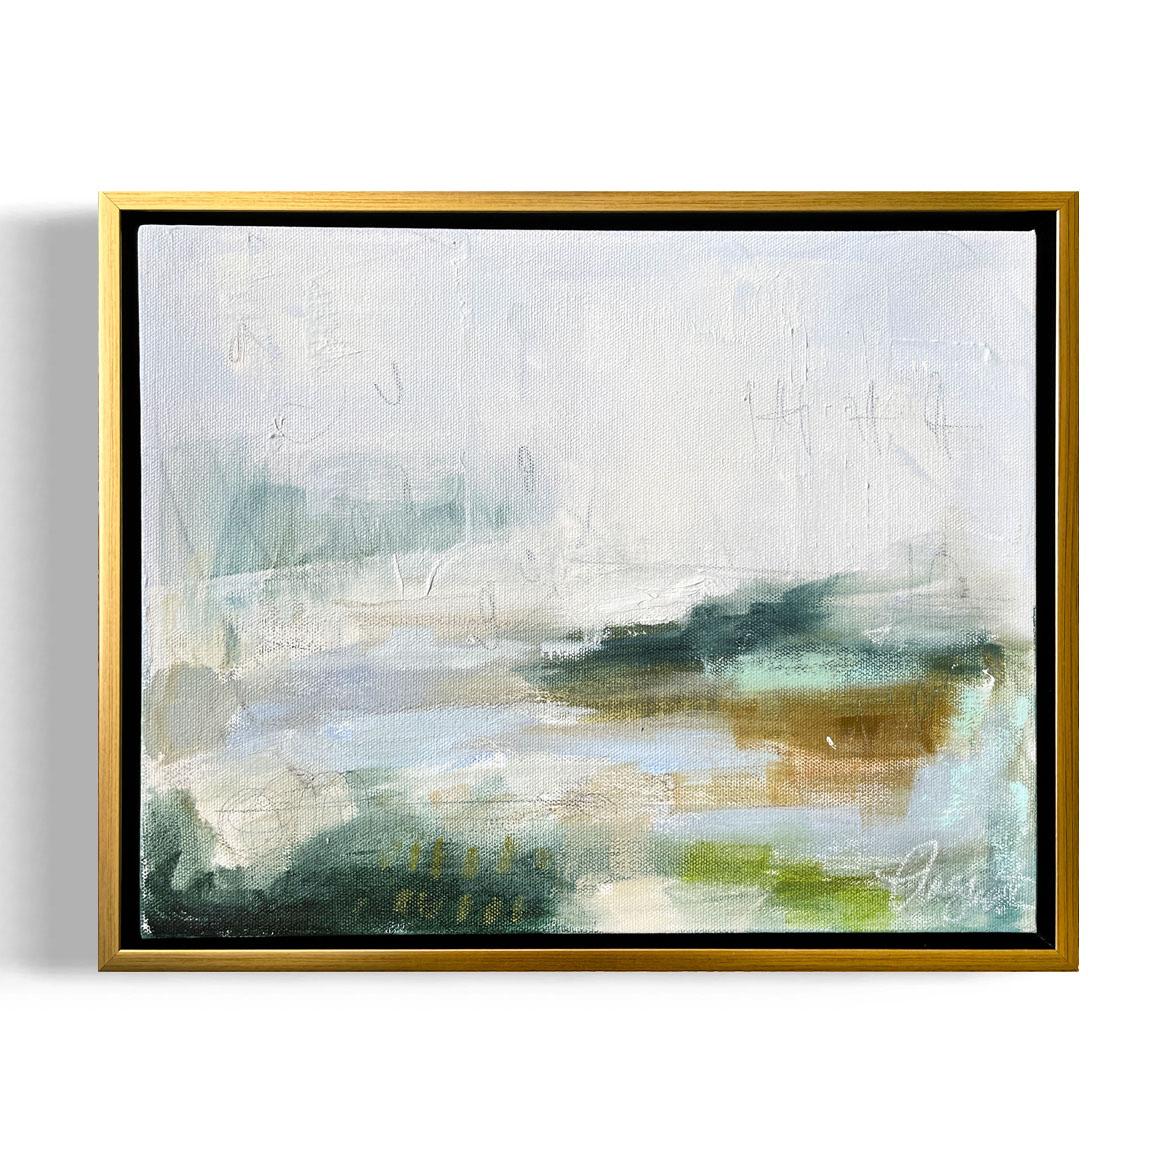 Augusta Wilson Landscape Painting - "Lake No. 2", framed abstract oil painting on canvas